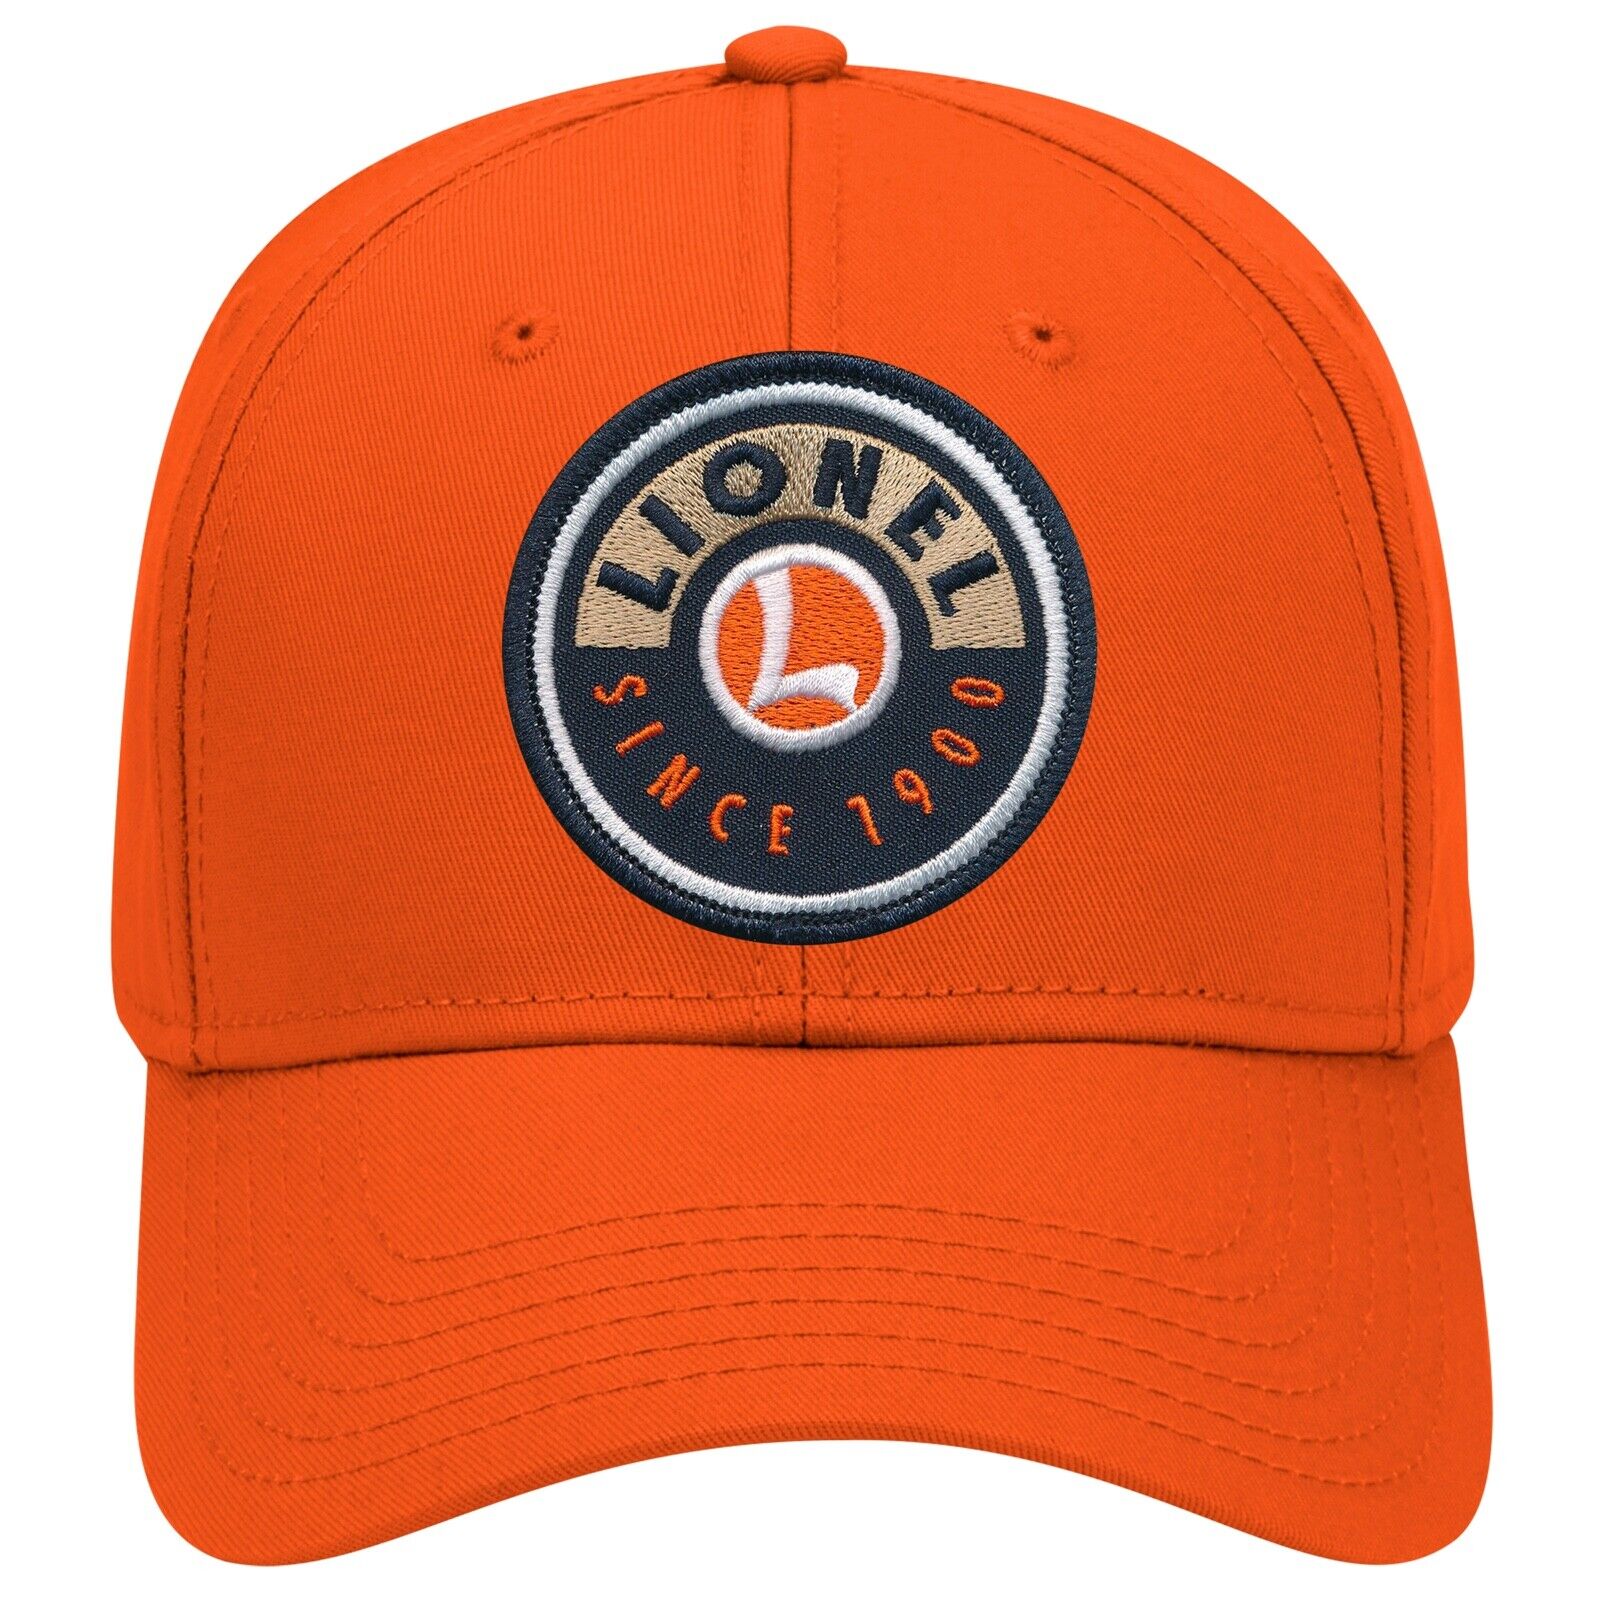 New LIONEL TRAINS Collector's Hat 